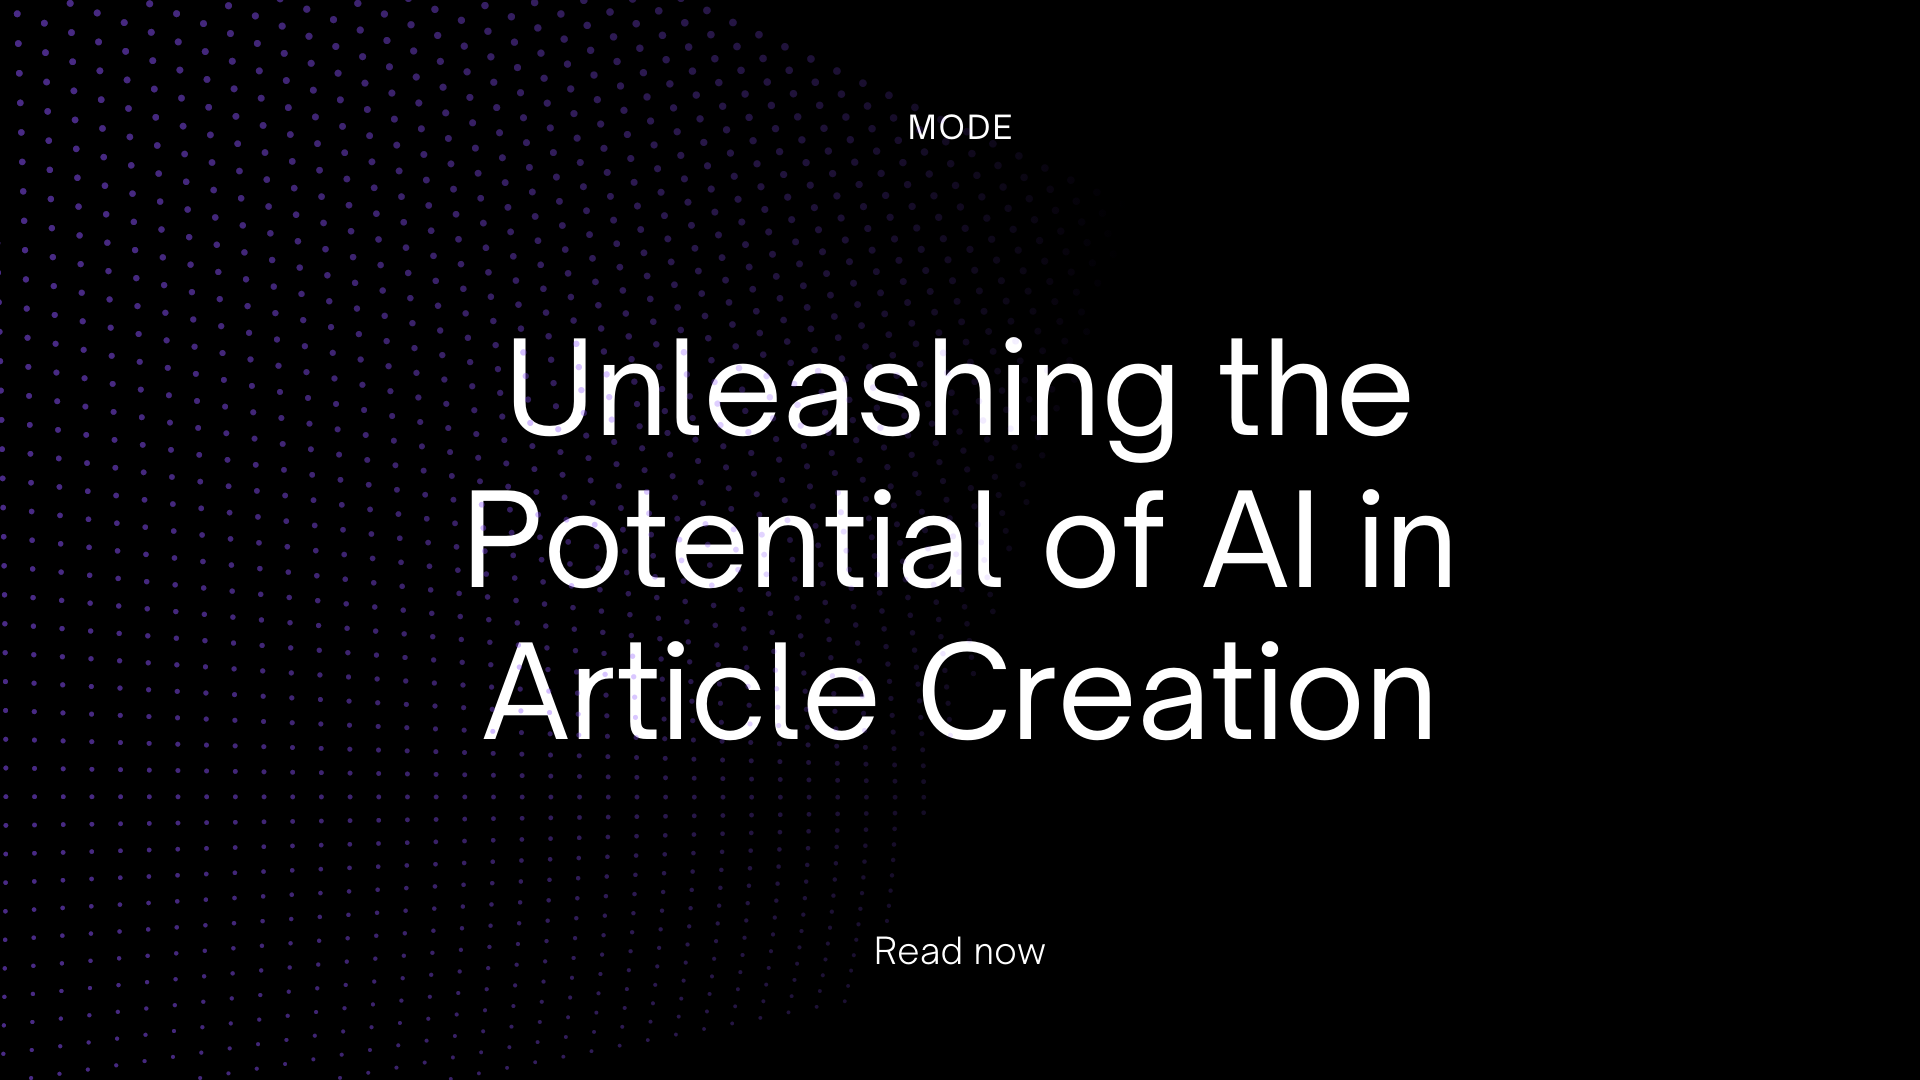 Unleashing the Potential of AI in Article Creation